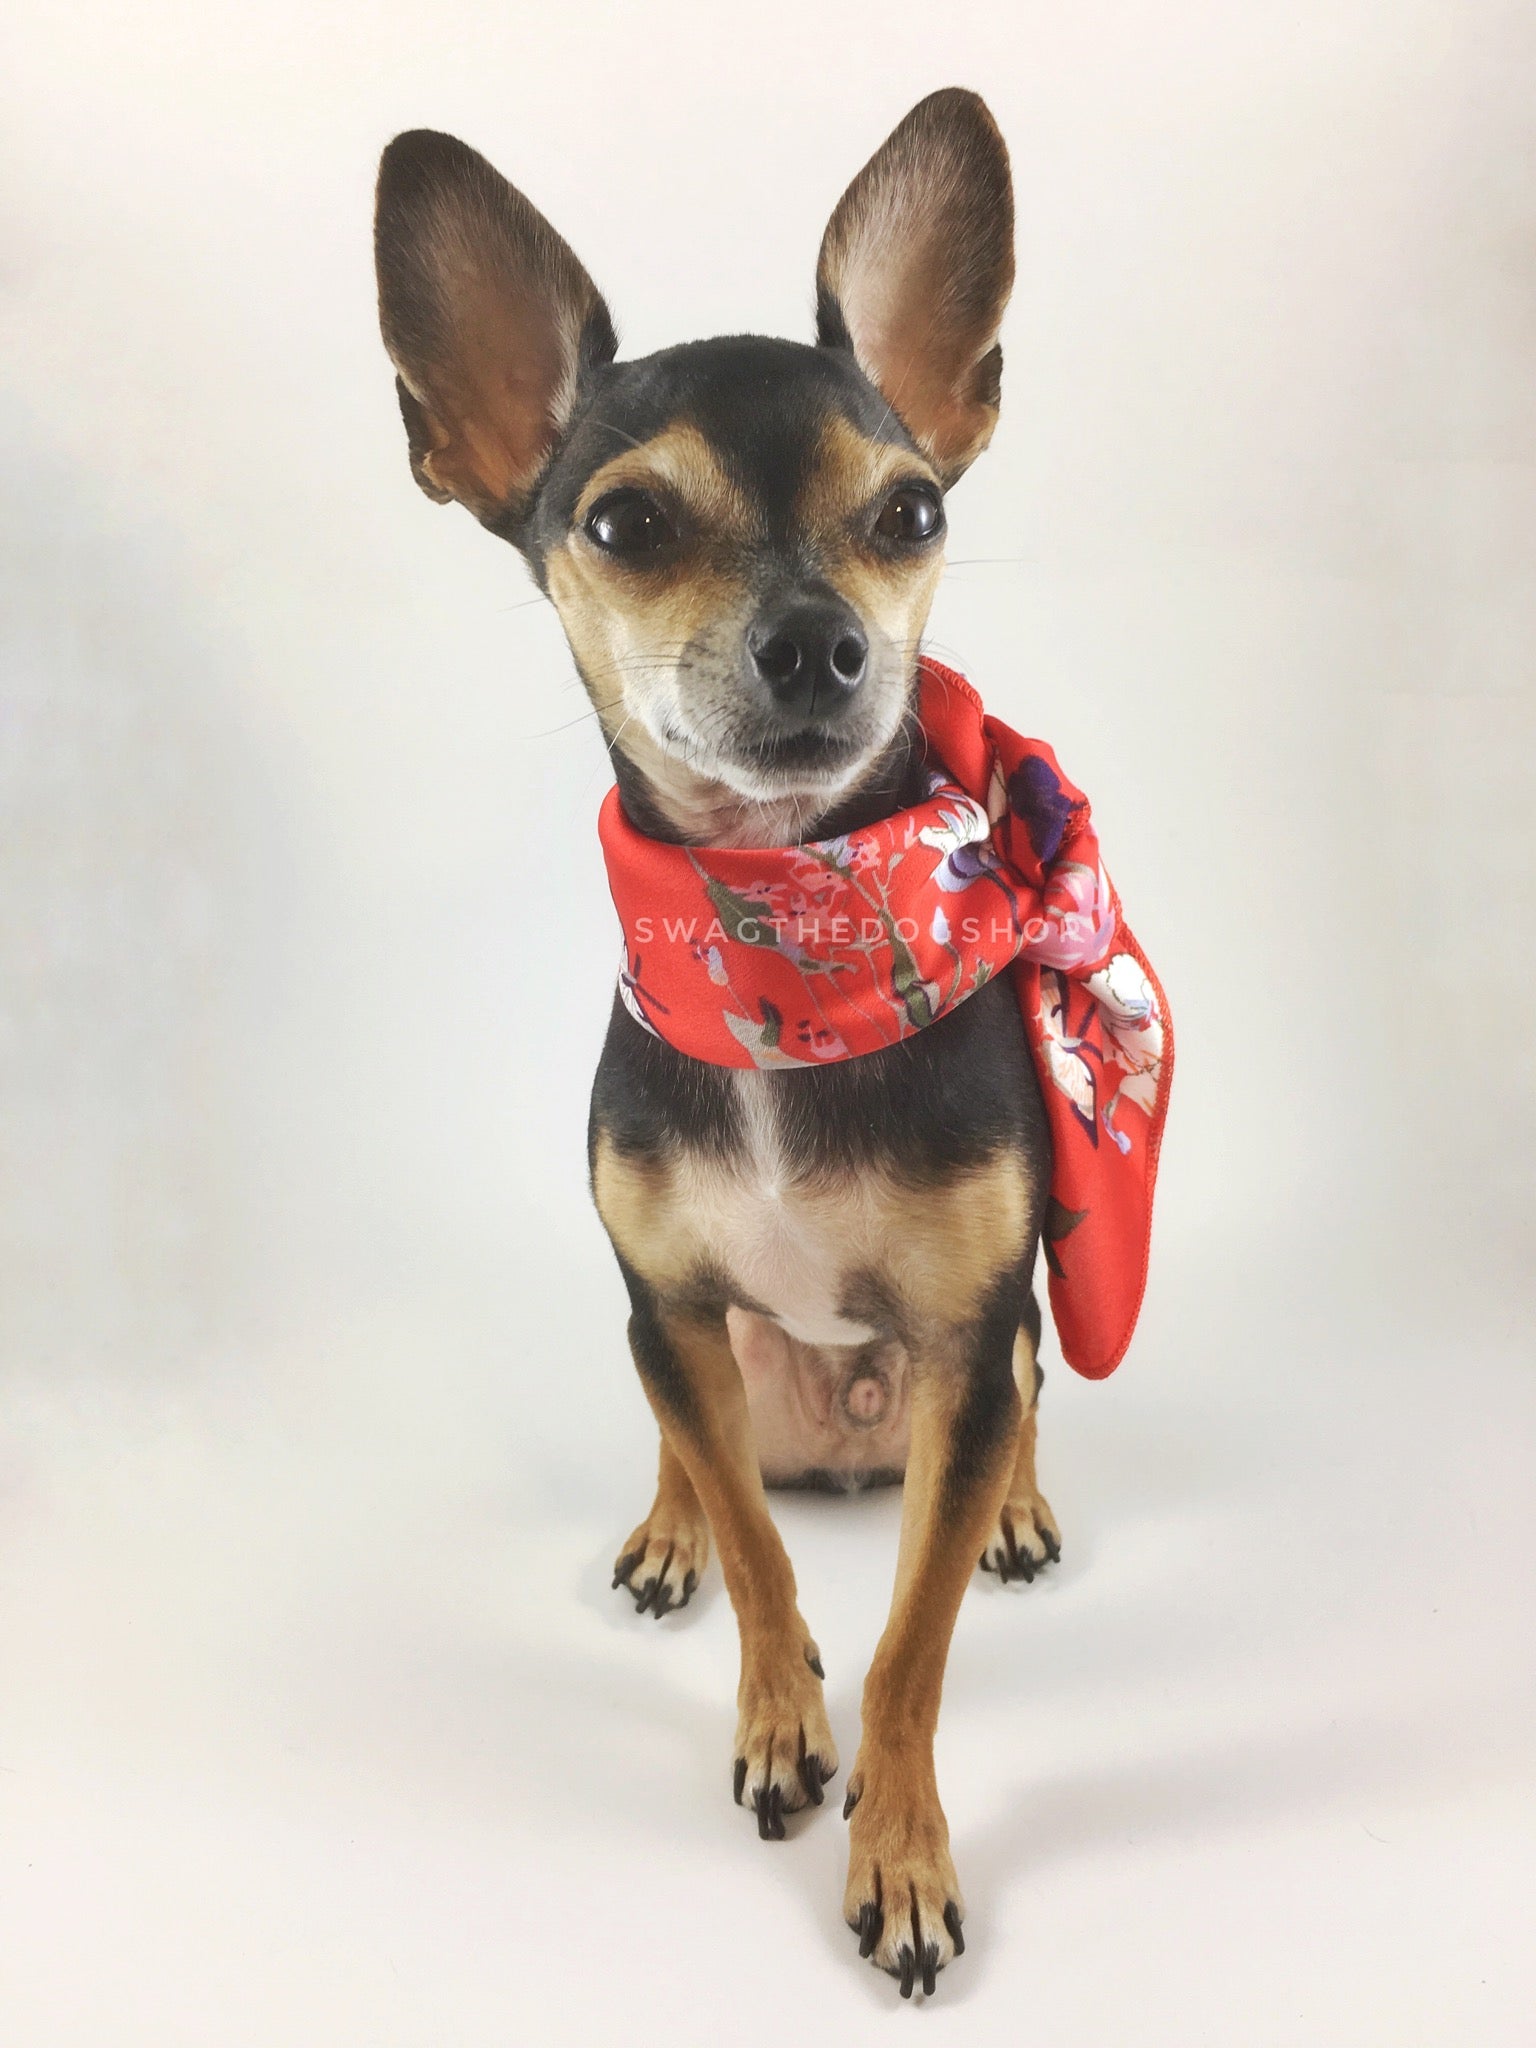 Red Wild Flowers Swagdana Scarf - Full Front View of Cute Chihuahua Wearing Swagdana Scarf as Neckerchief. Dog Bandana. Dog Scarf.